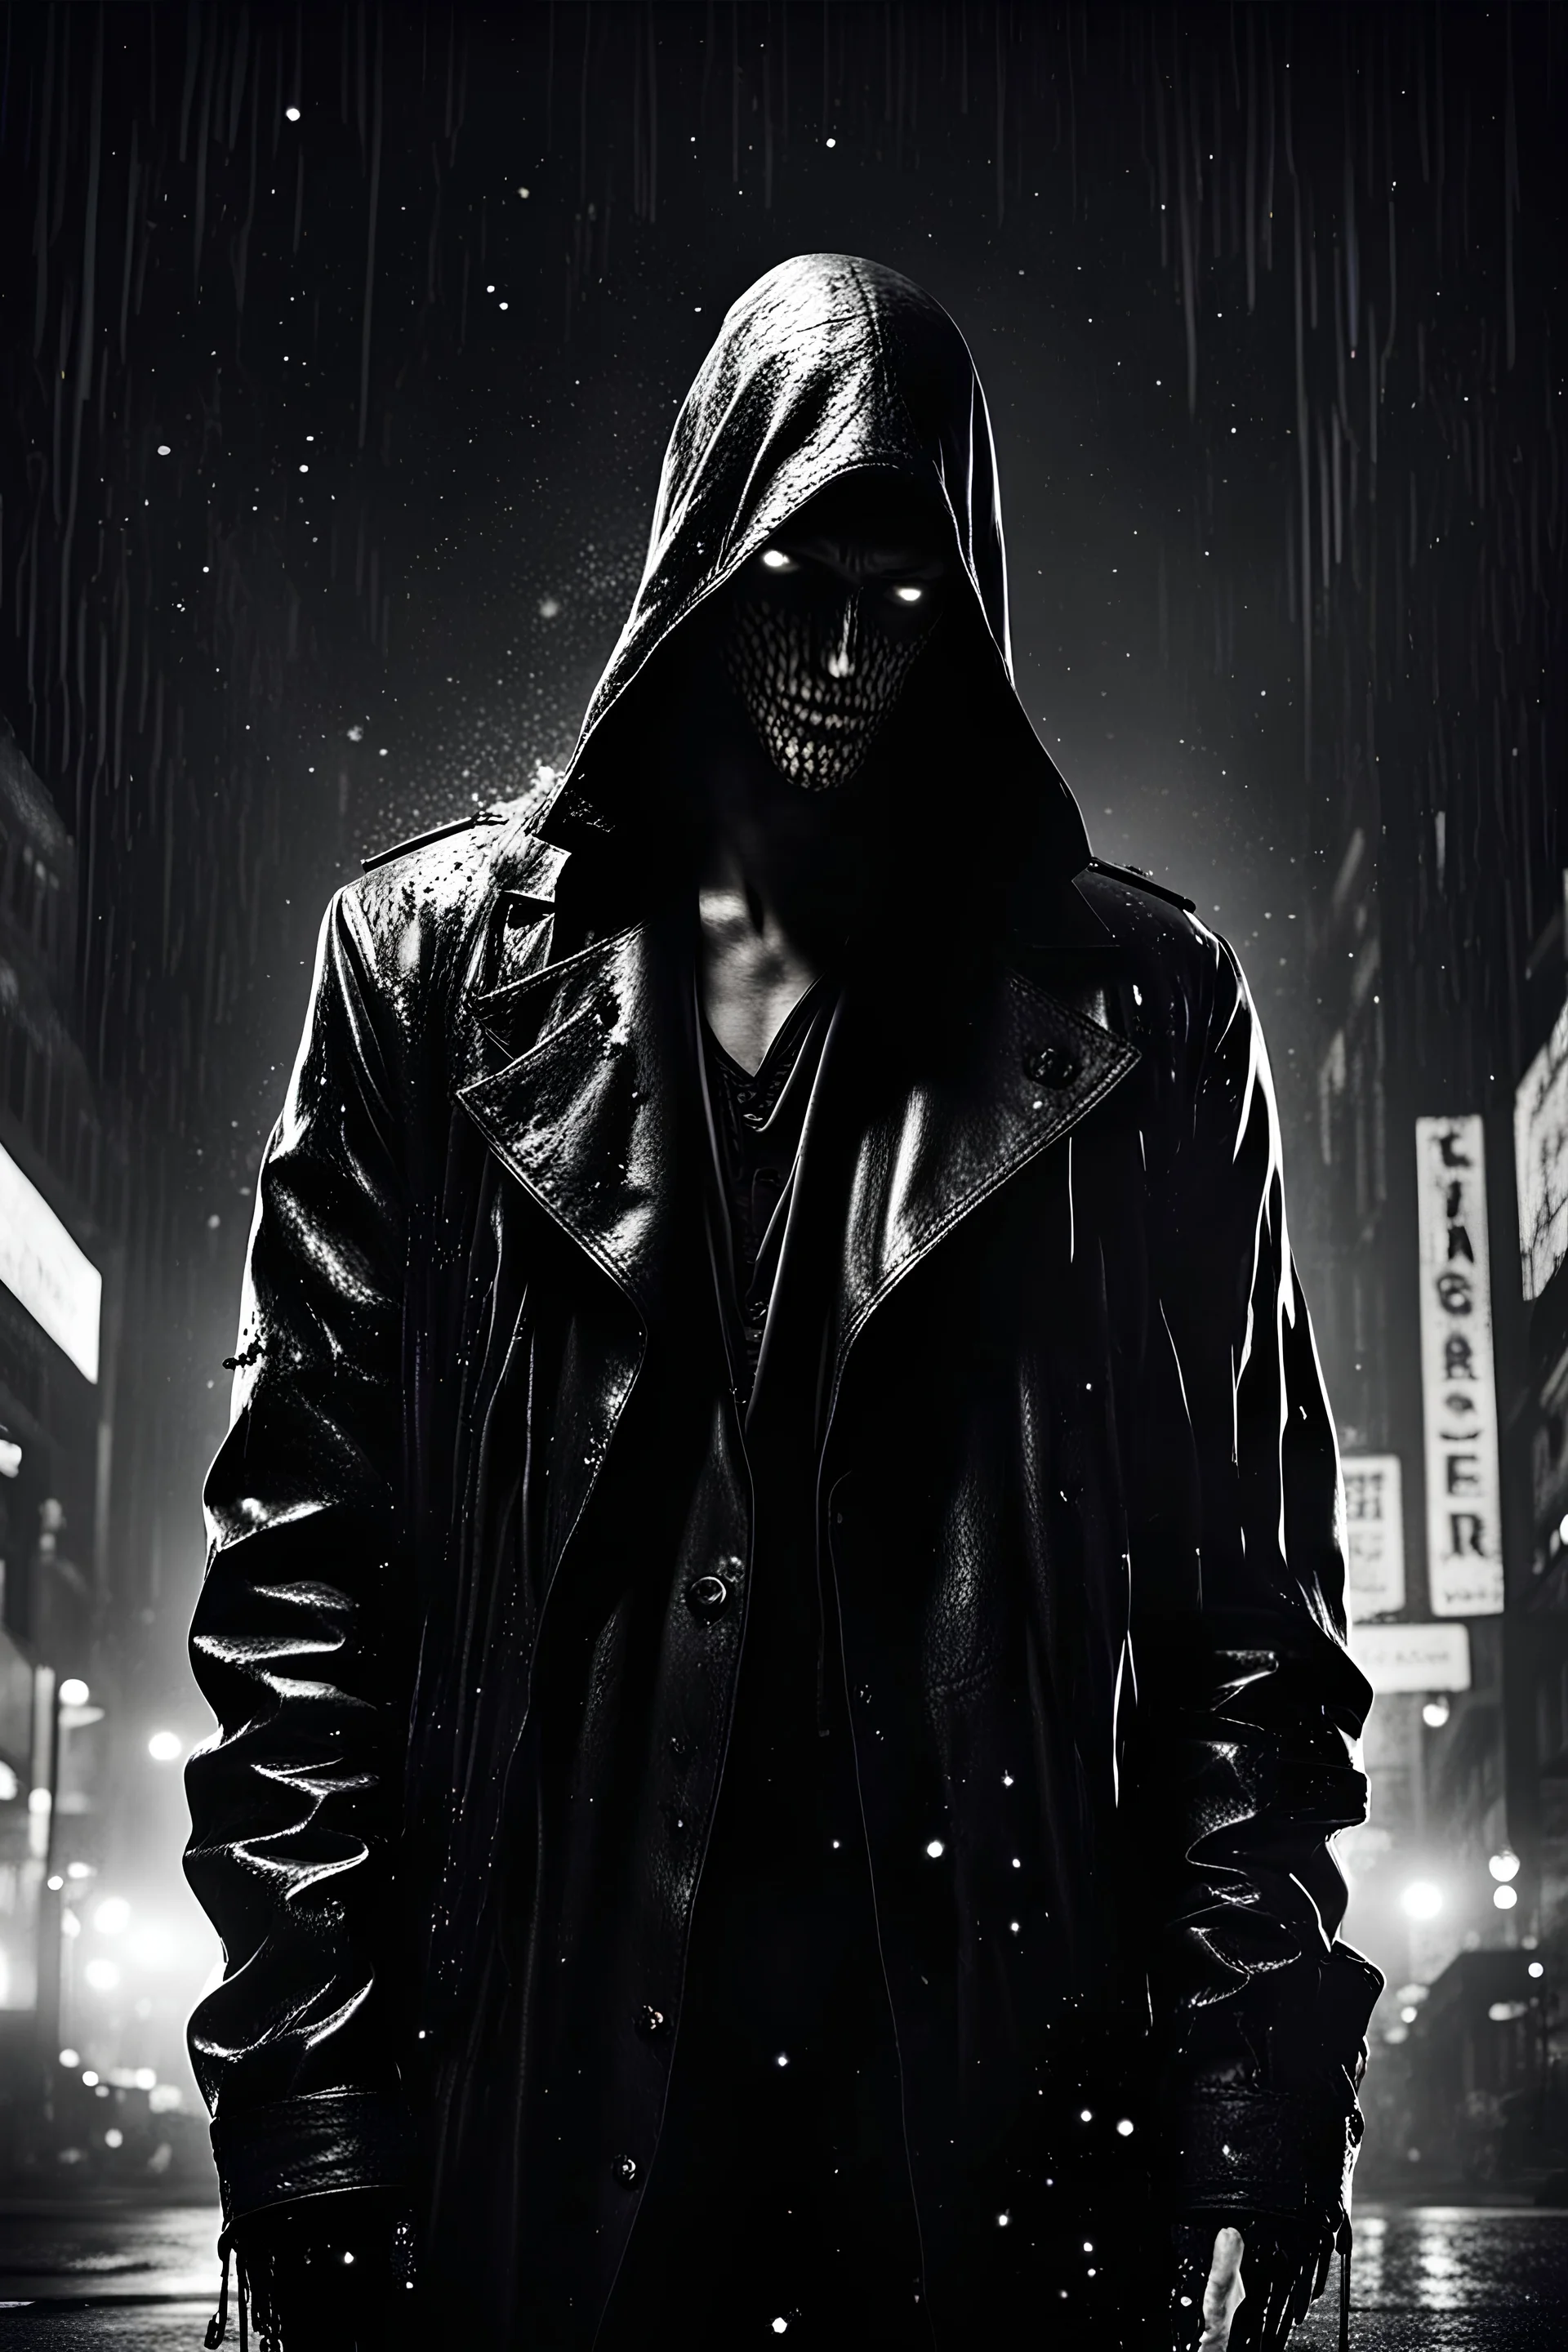 Sin city, killer dripping blood, night full of stars, savage, Alone, mysterious, hidden face, clam and relaxed, killer, leather long coat, male